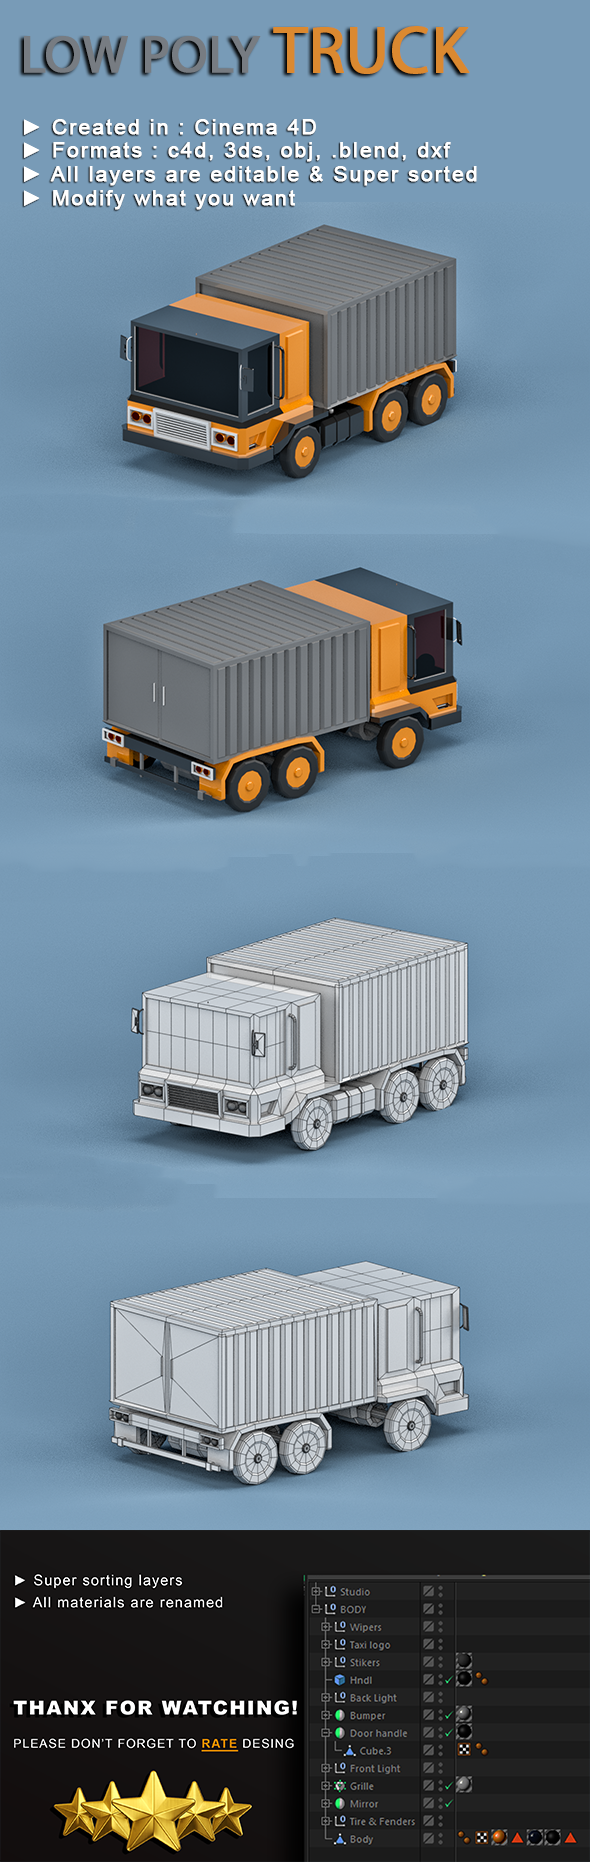 Low-poly Truck - 3Docean 22674172